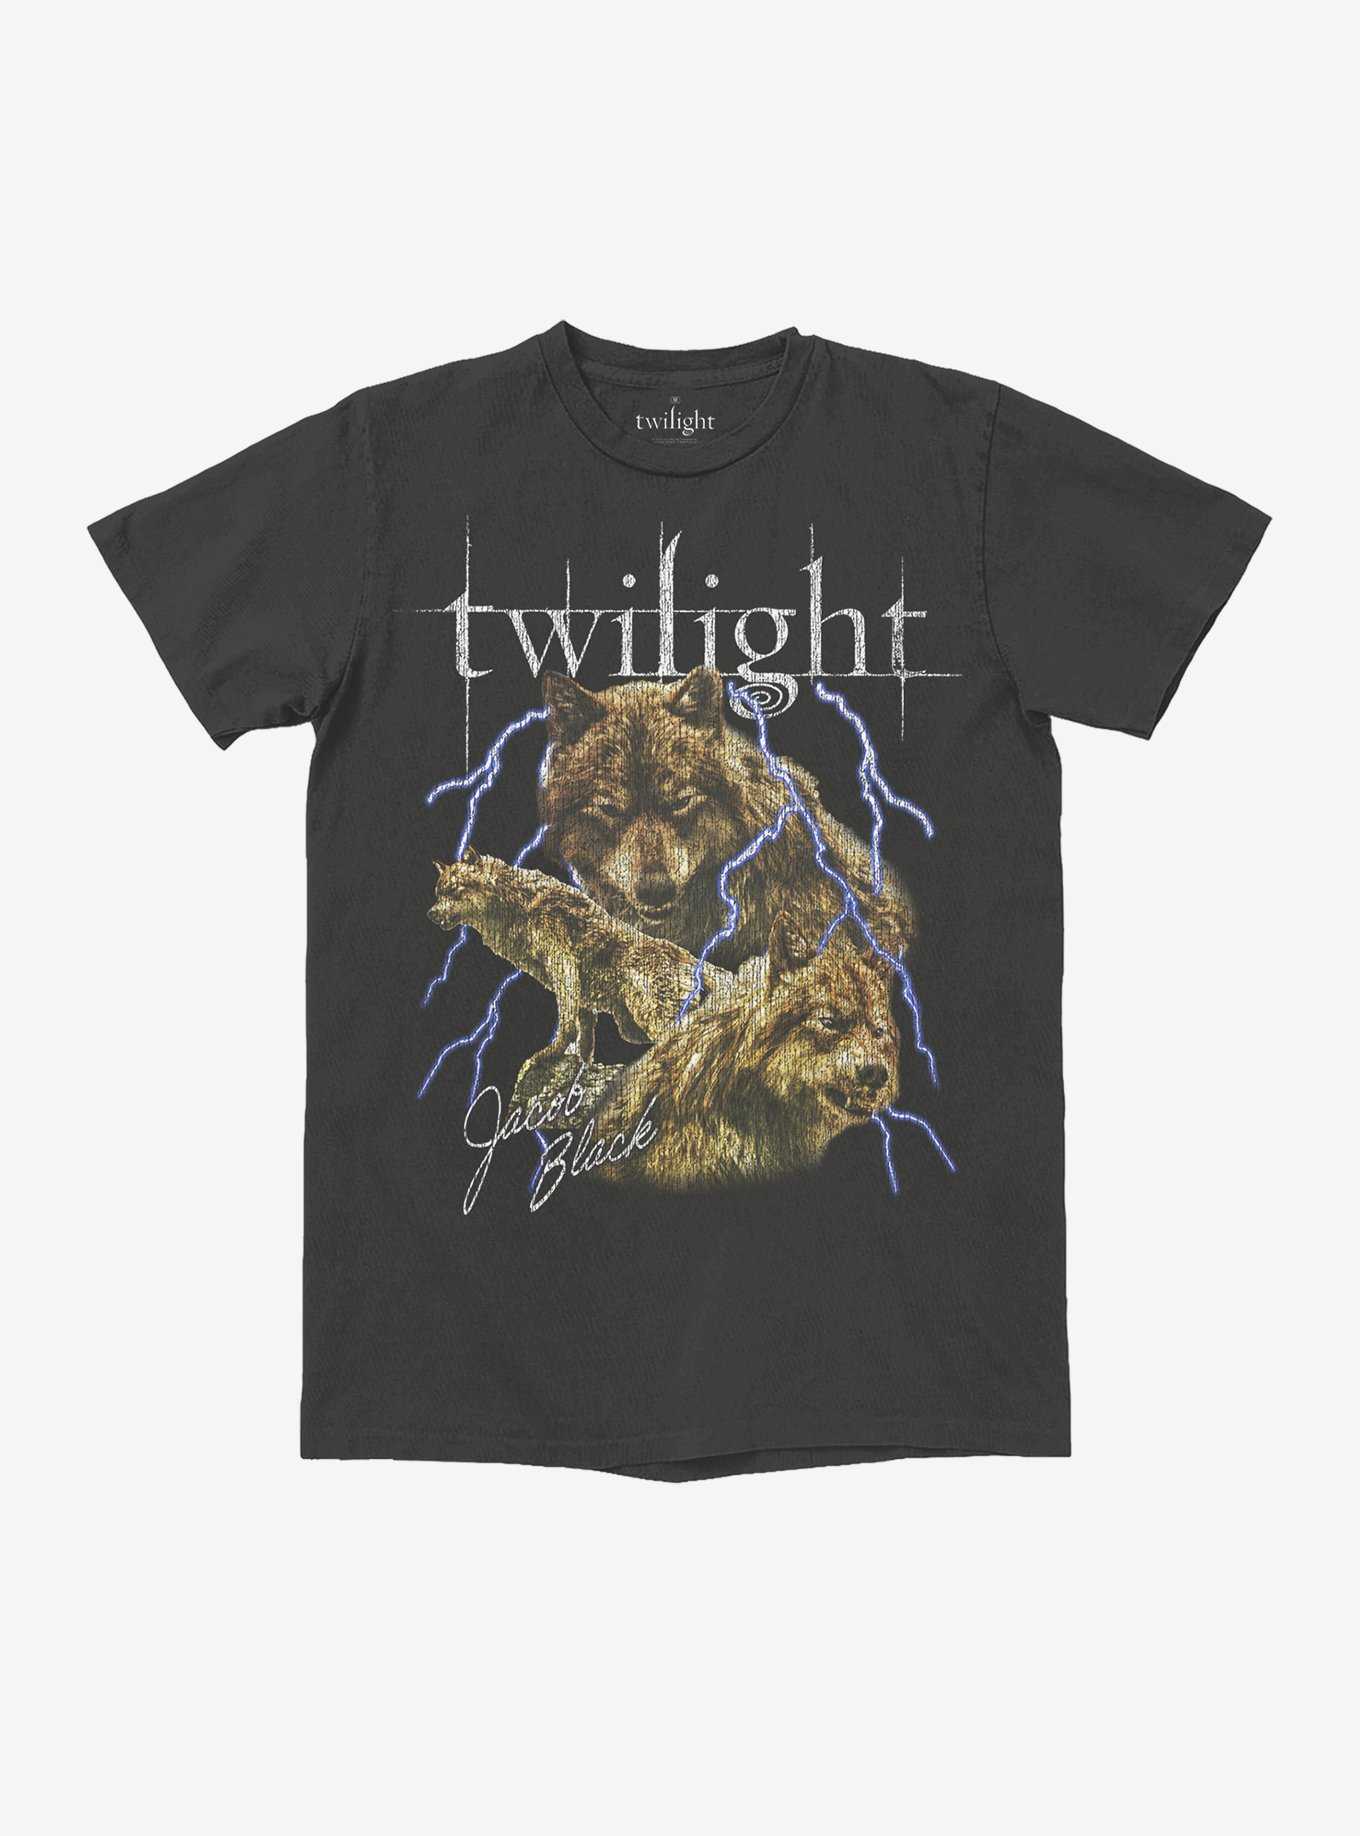 Twilight T Shirt Ed and Bella Ladies Short Sleeve T Shirts Twilight Movies  Graphic Tees for Women